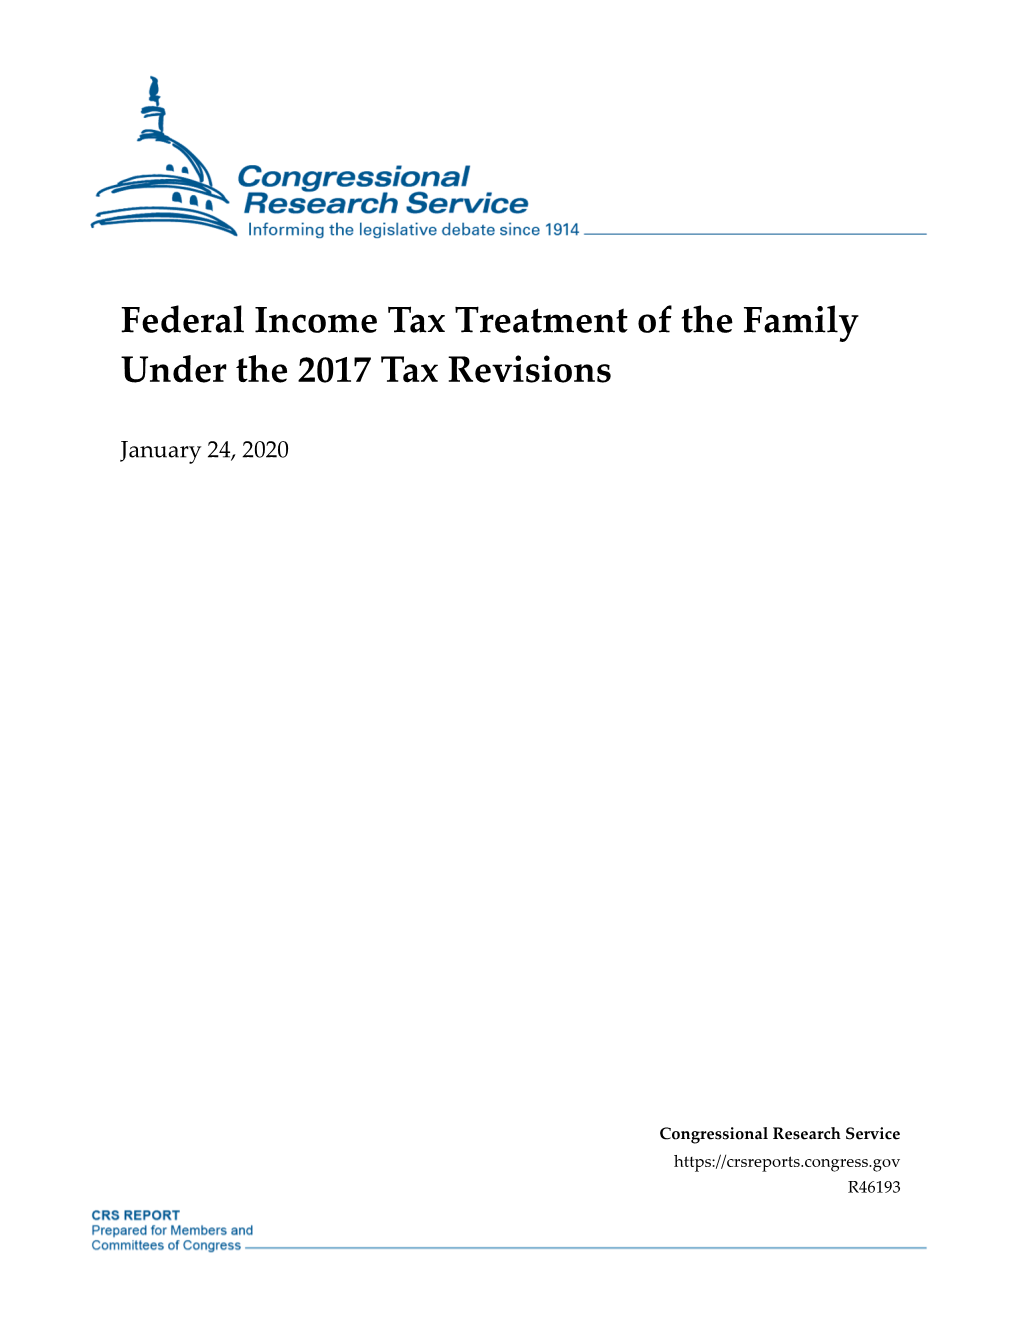 Federal Income Tax Treatment of the Family Under the 2017 Tax Revisions